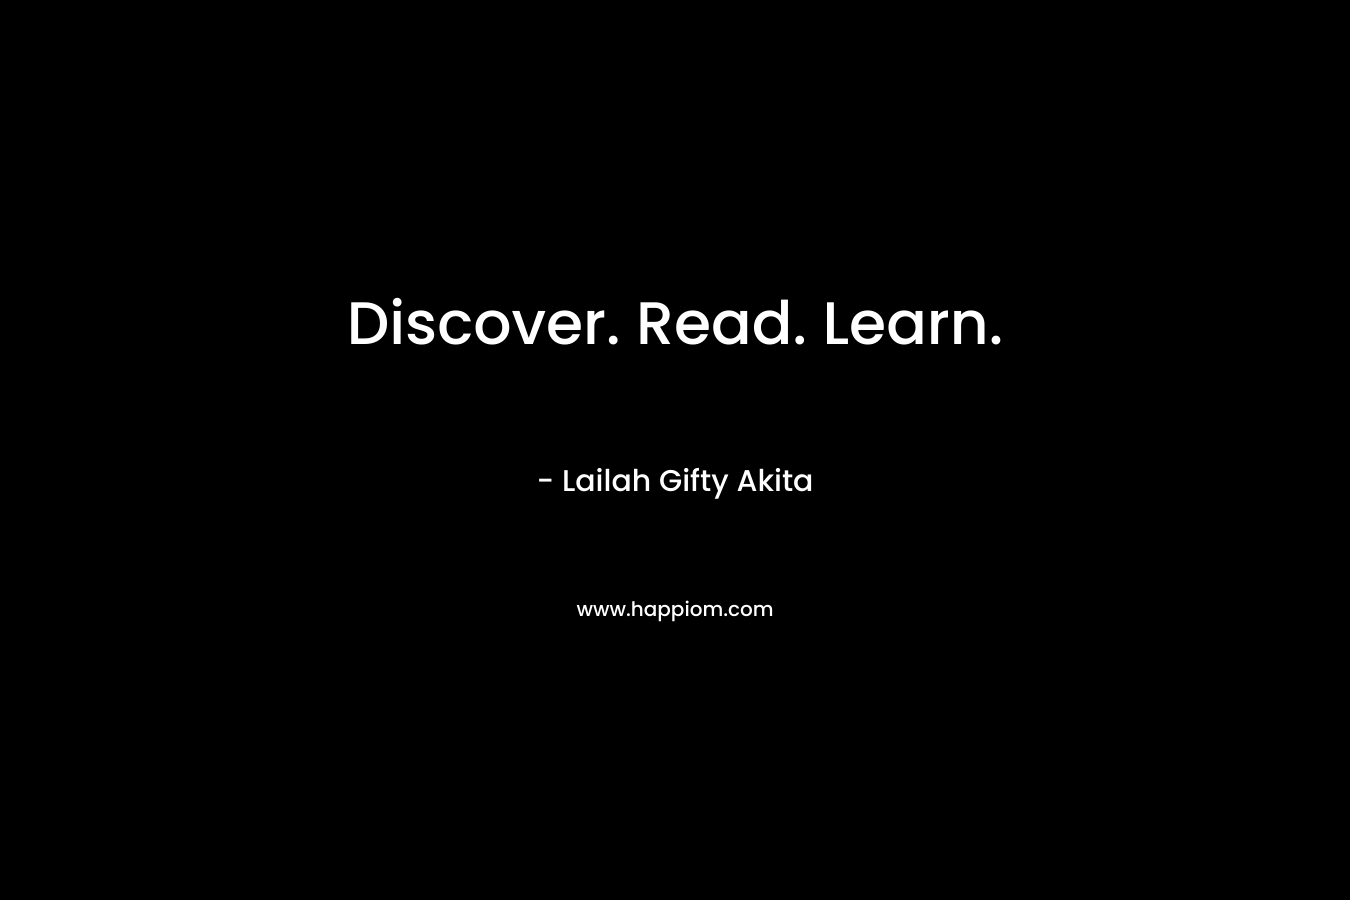 Discover. Read. Learn.